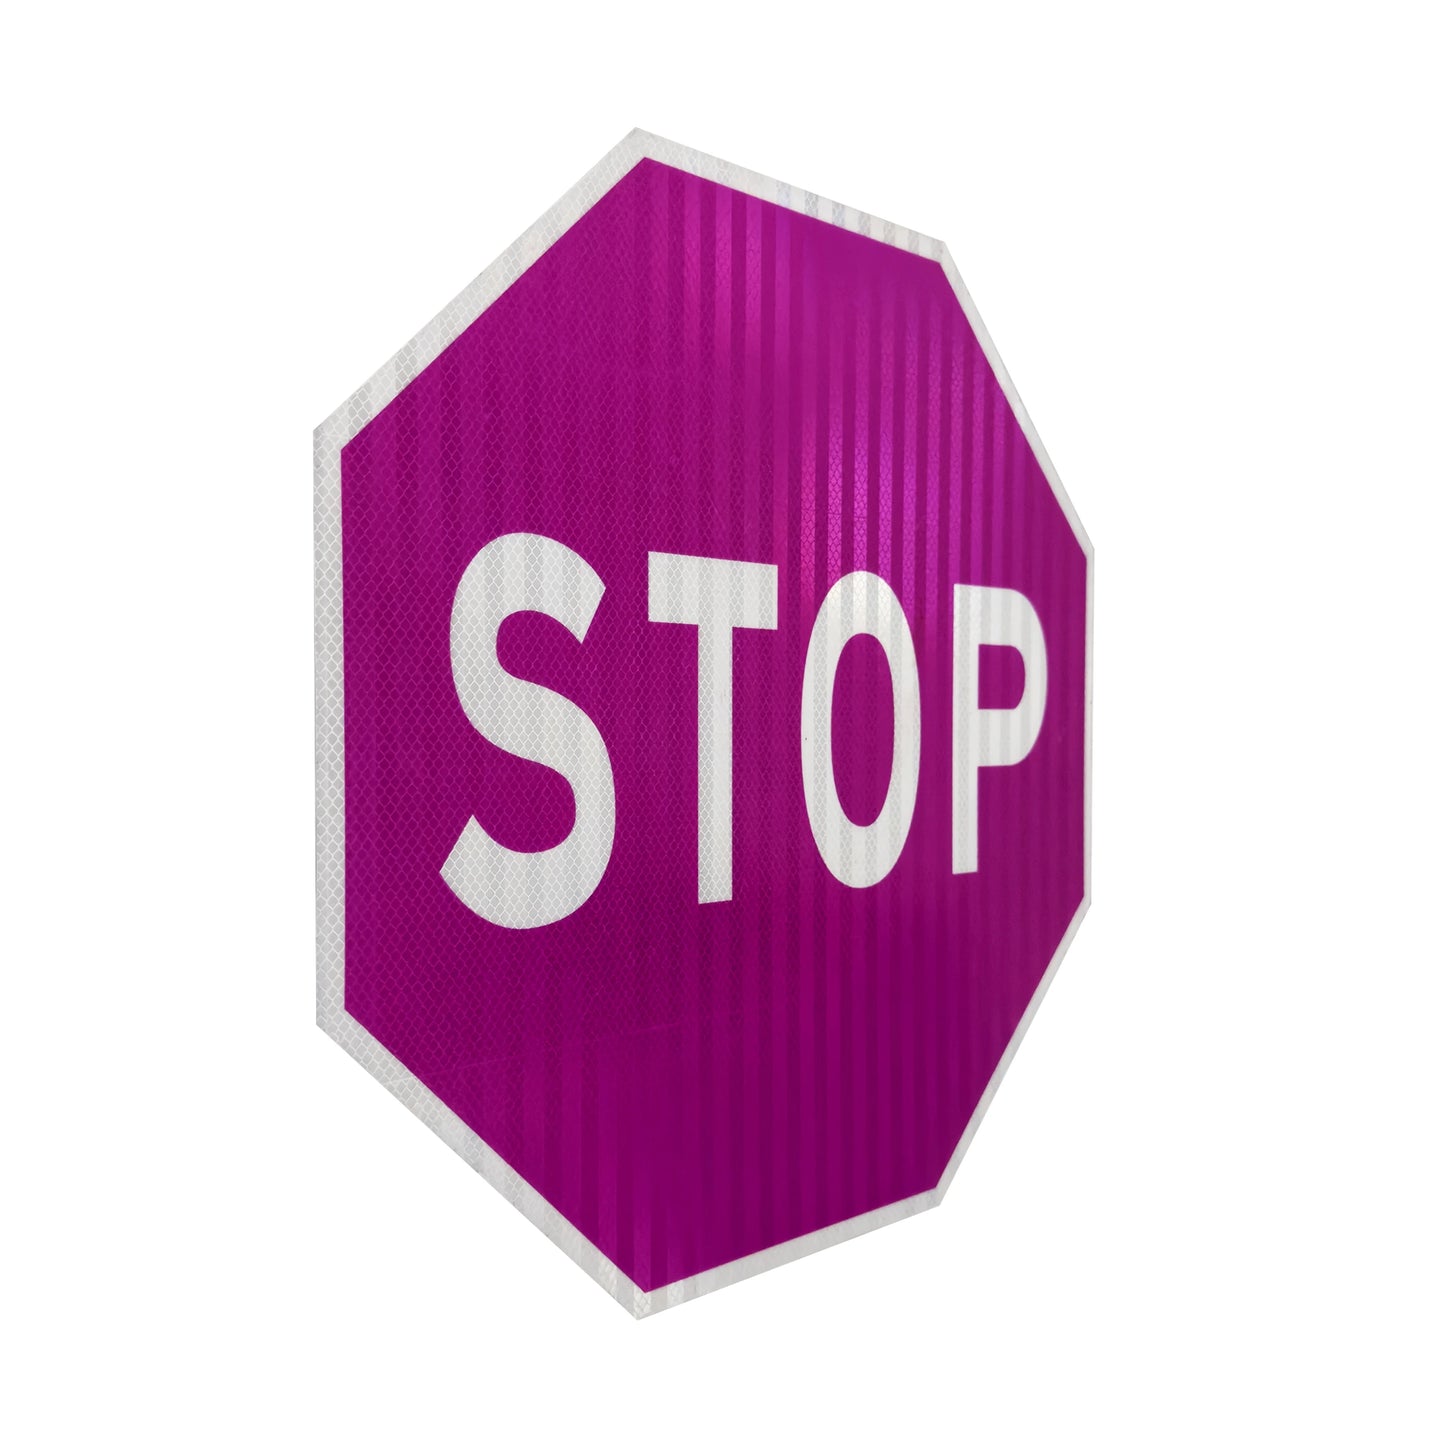 Pink Stopsign